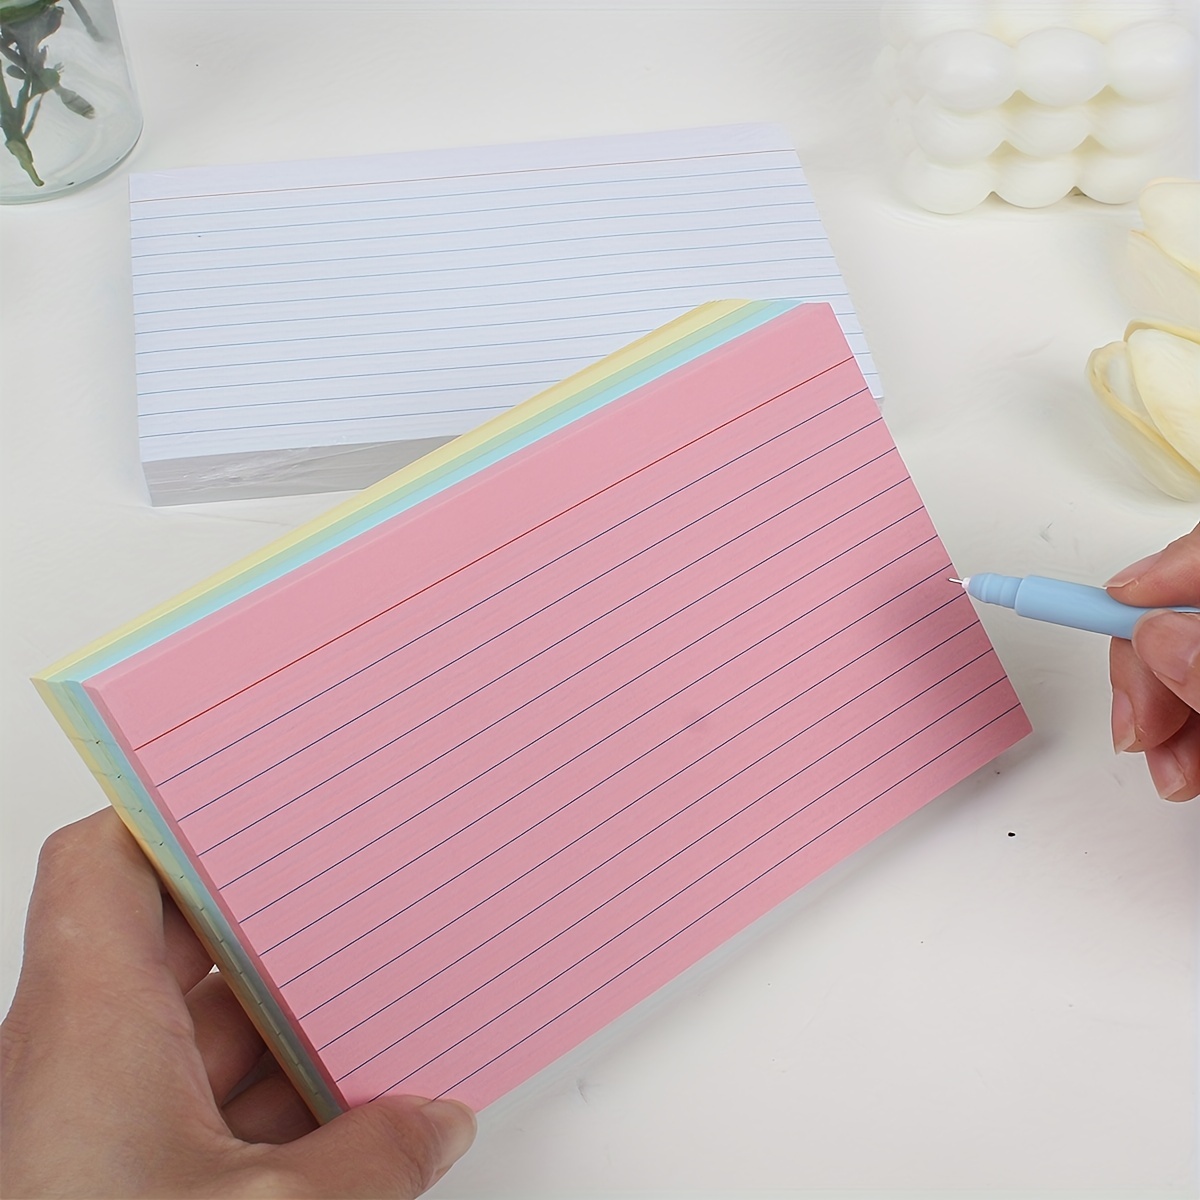 150 Pcs Cards Office Index Cards Message Study Cards Lined Index Cards  Ruled Index Cards Flash Cards Paper For Students School - AliExpress